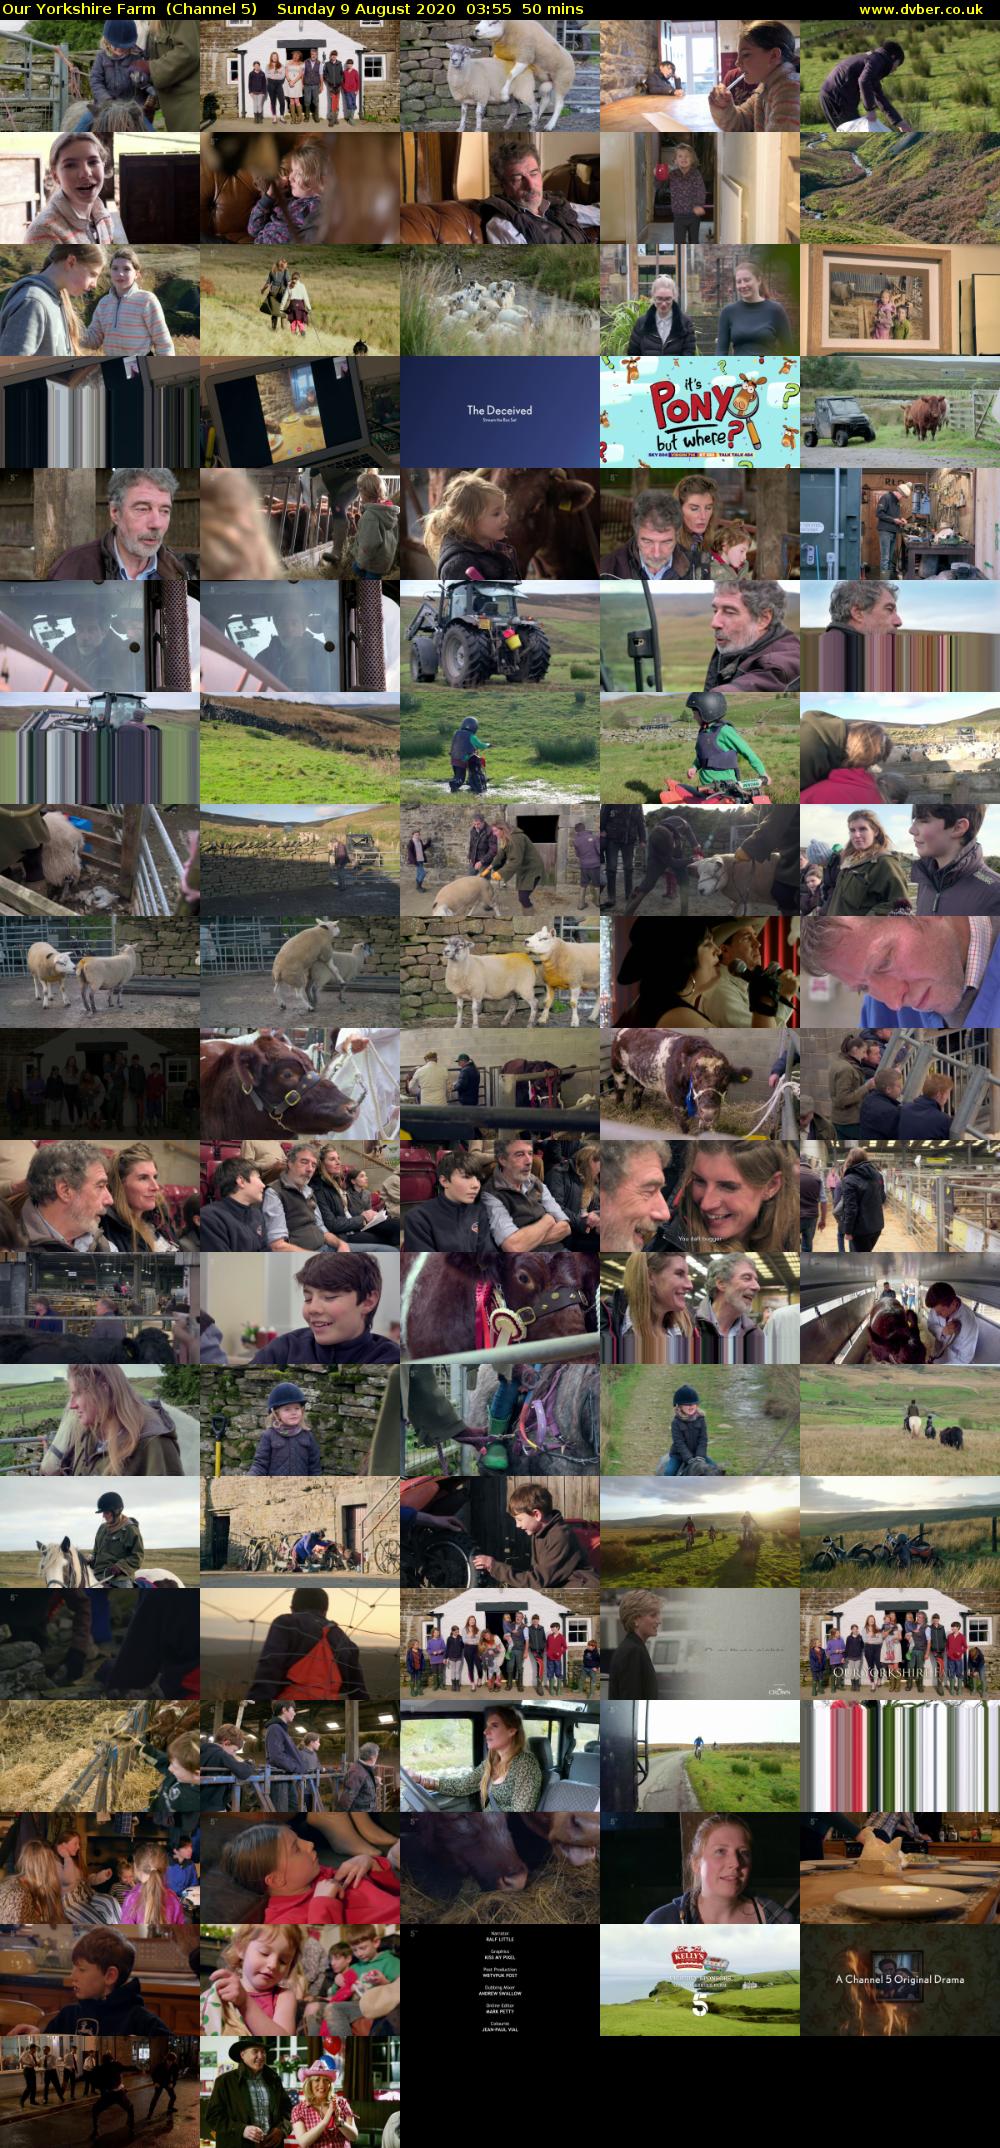 Our Yorkshire Farm  (Channel 5) Sunday 9 August 2020 03:55 - 04:45